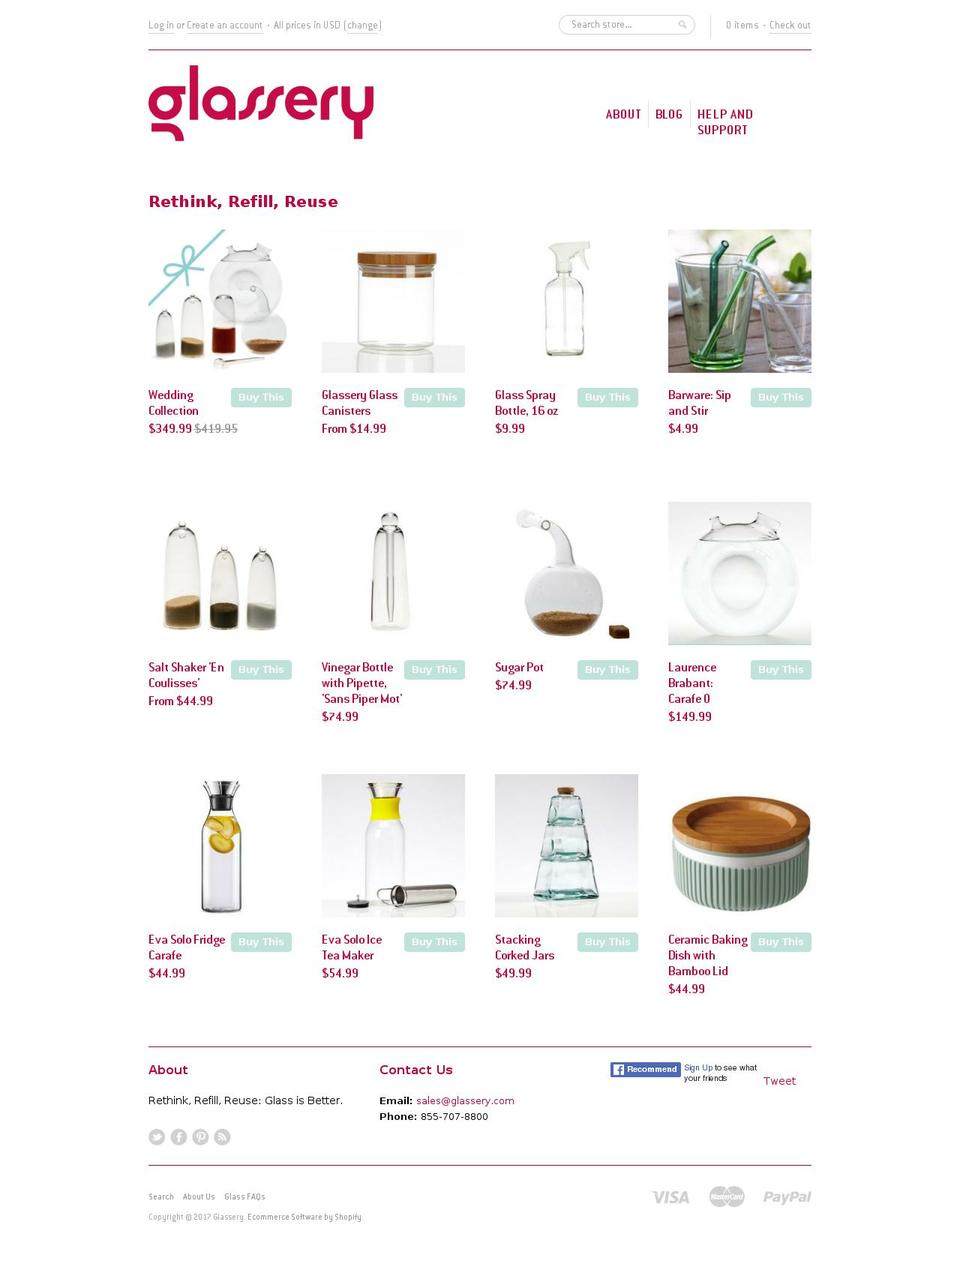 Live Shopify theme site example glasserie.us